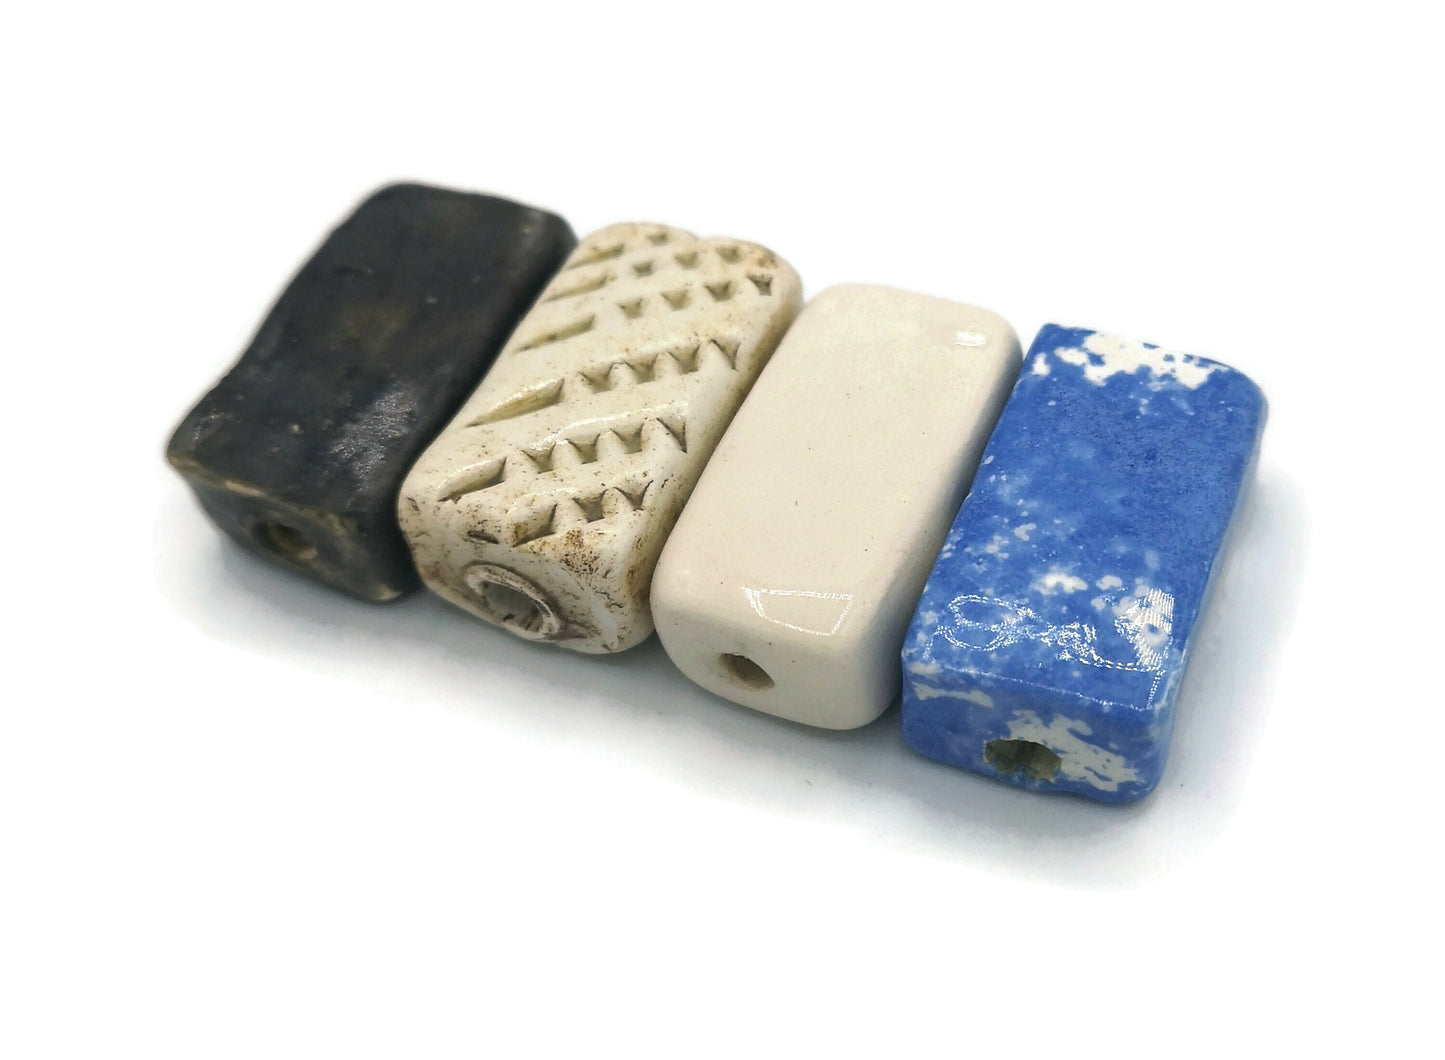 LARGE RECTANGULAR BEADS, Mixed Set of 4 Ceramic Beads For Jewelry Making, Rectangle Tile Beads 2mm Hole Clay Beads For Macrame - Ceramica Ana Rafael